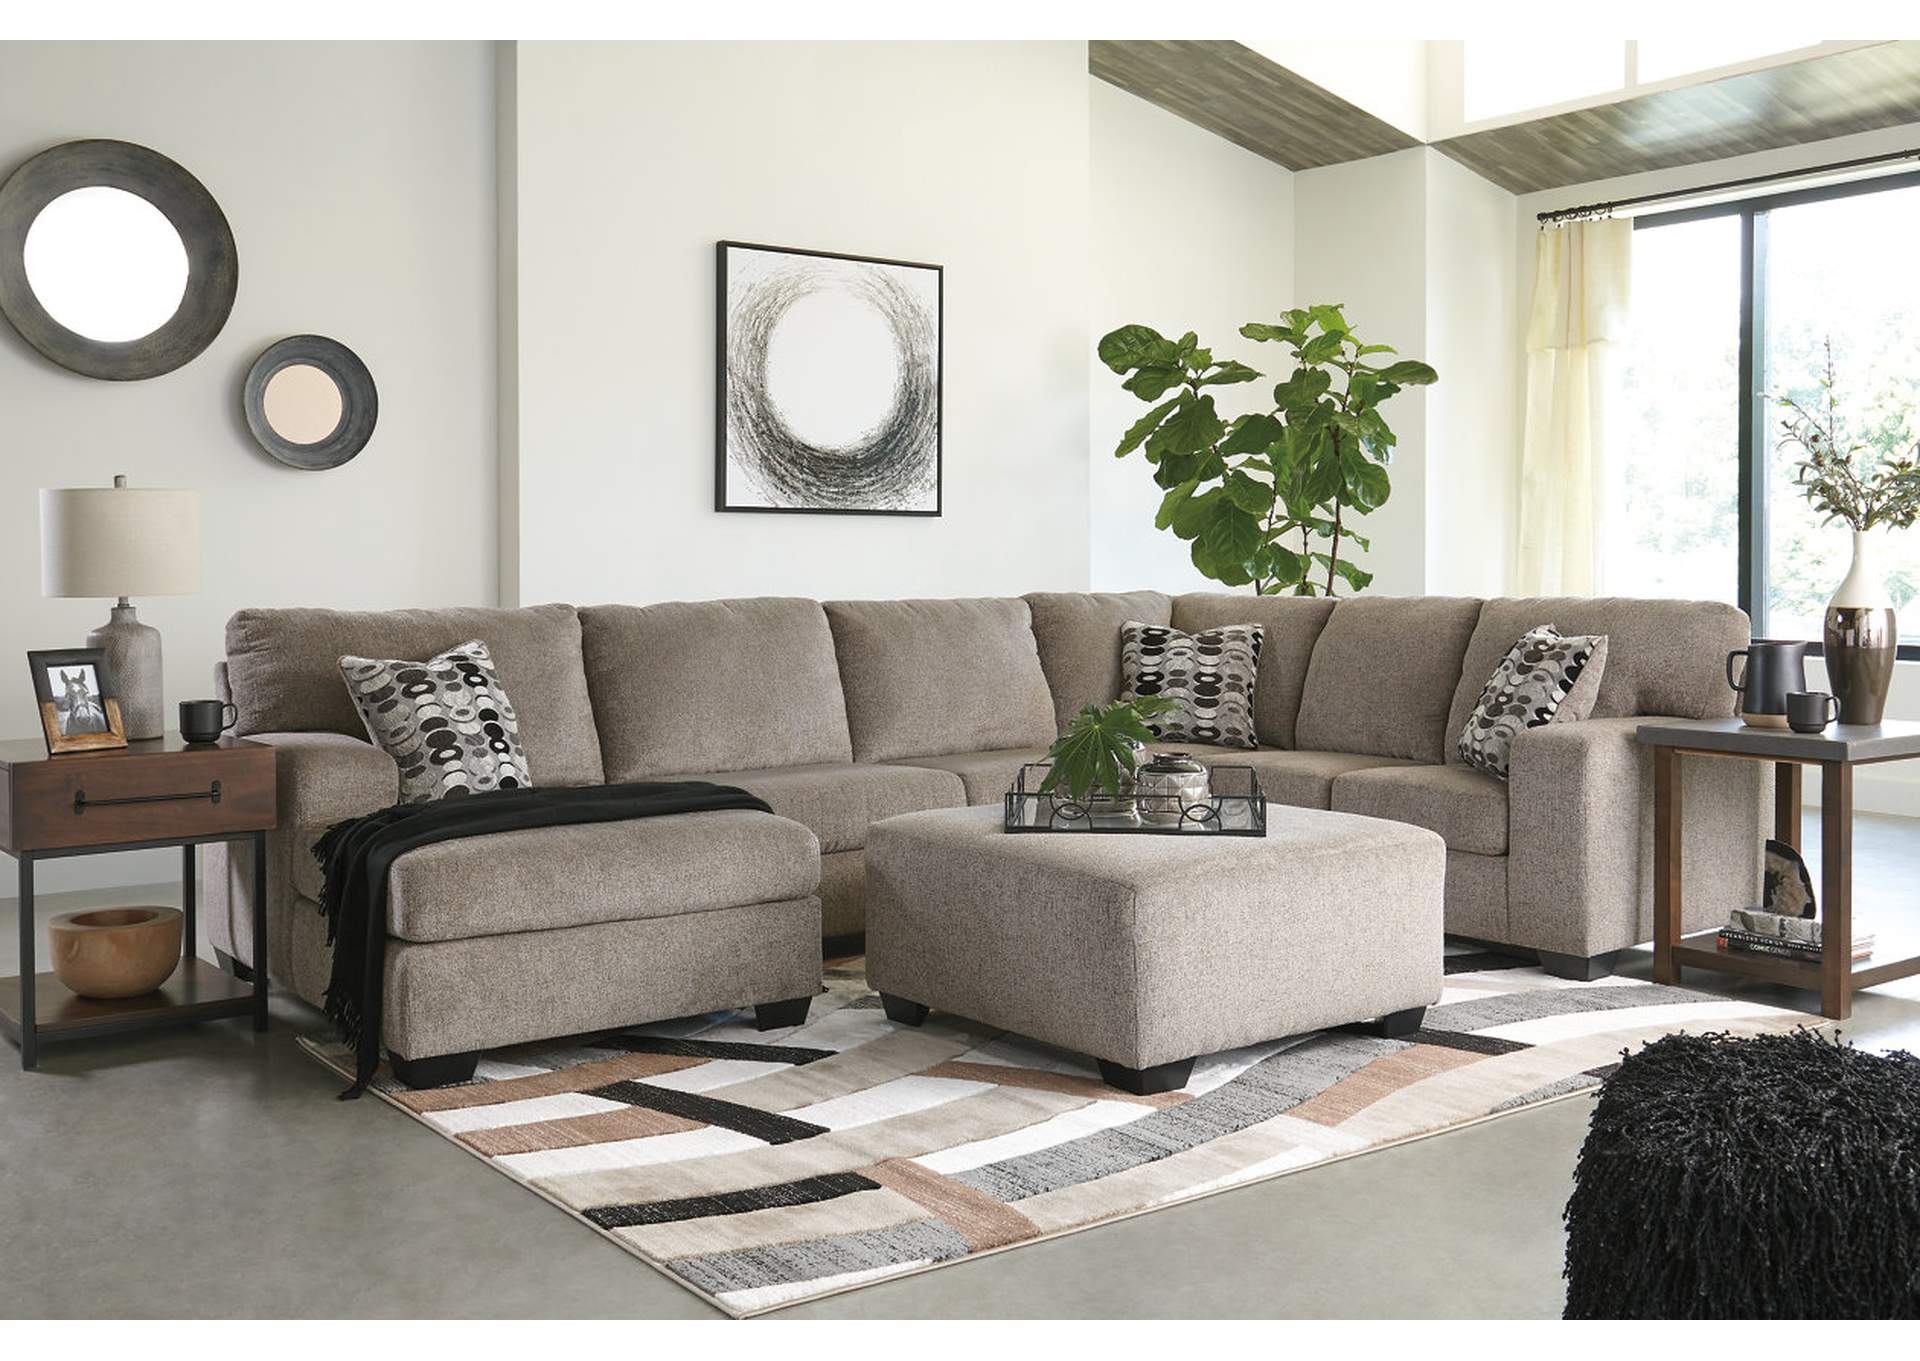 Ballinasloe 3-Piece Sectional with Chaise,Signature Design By Ashley